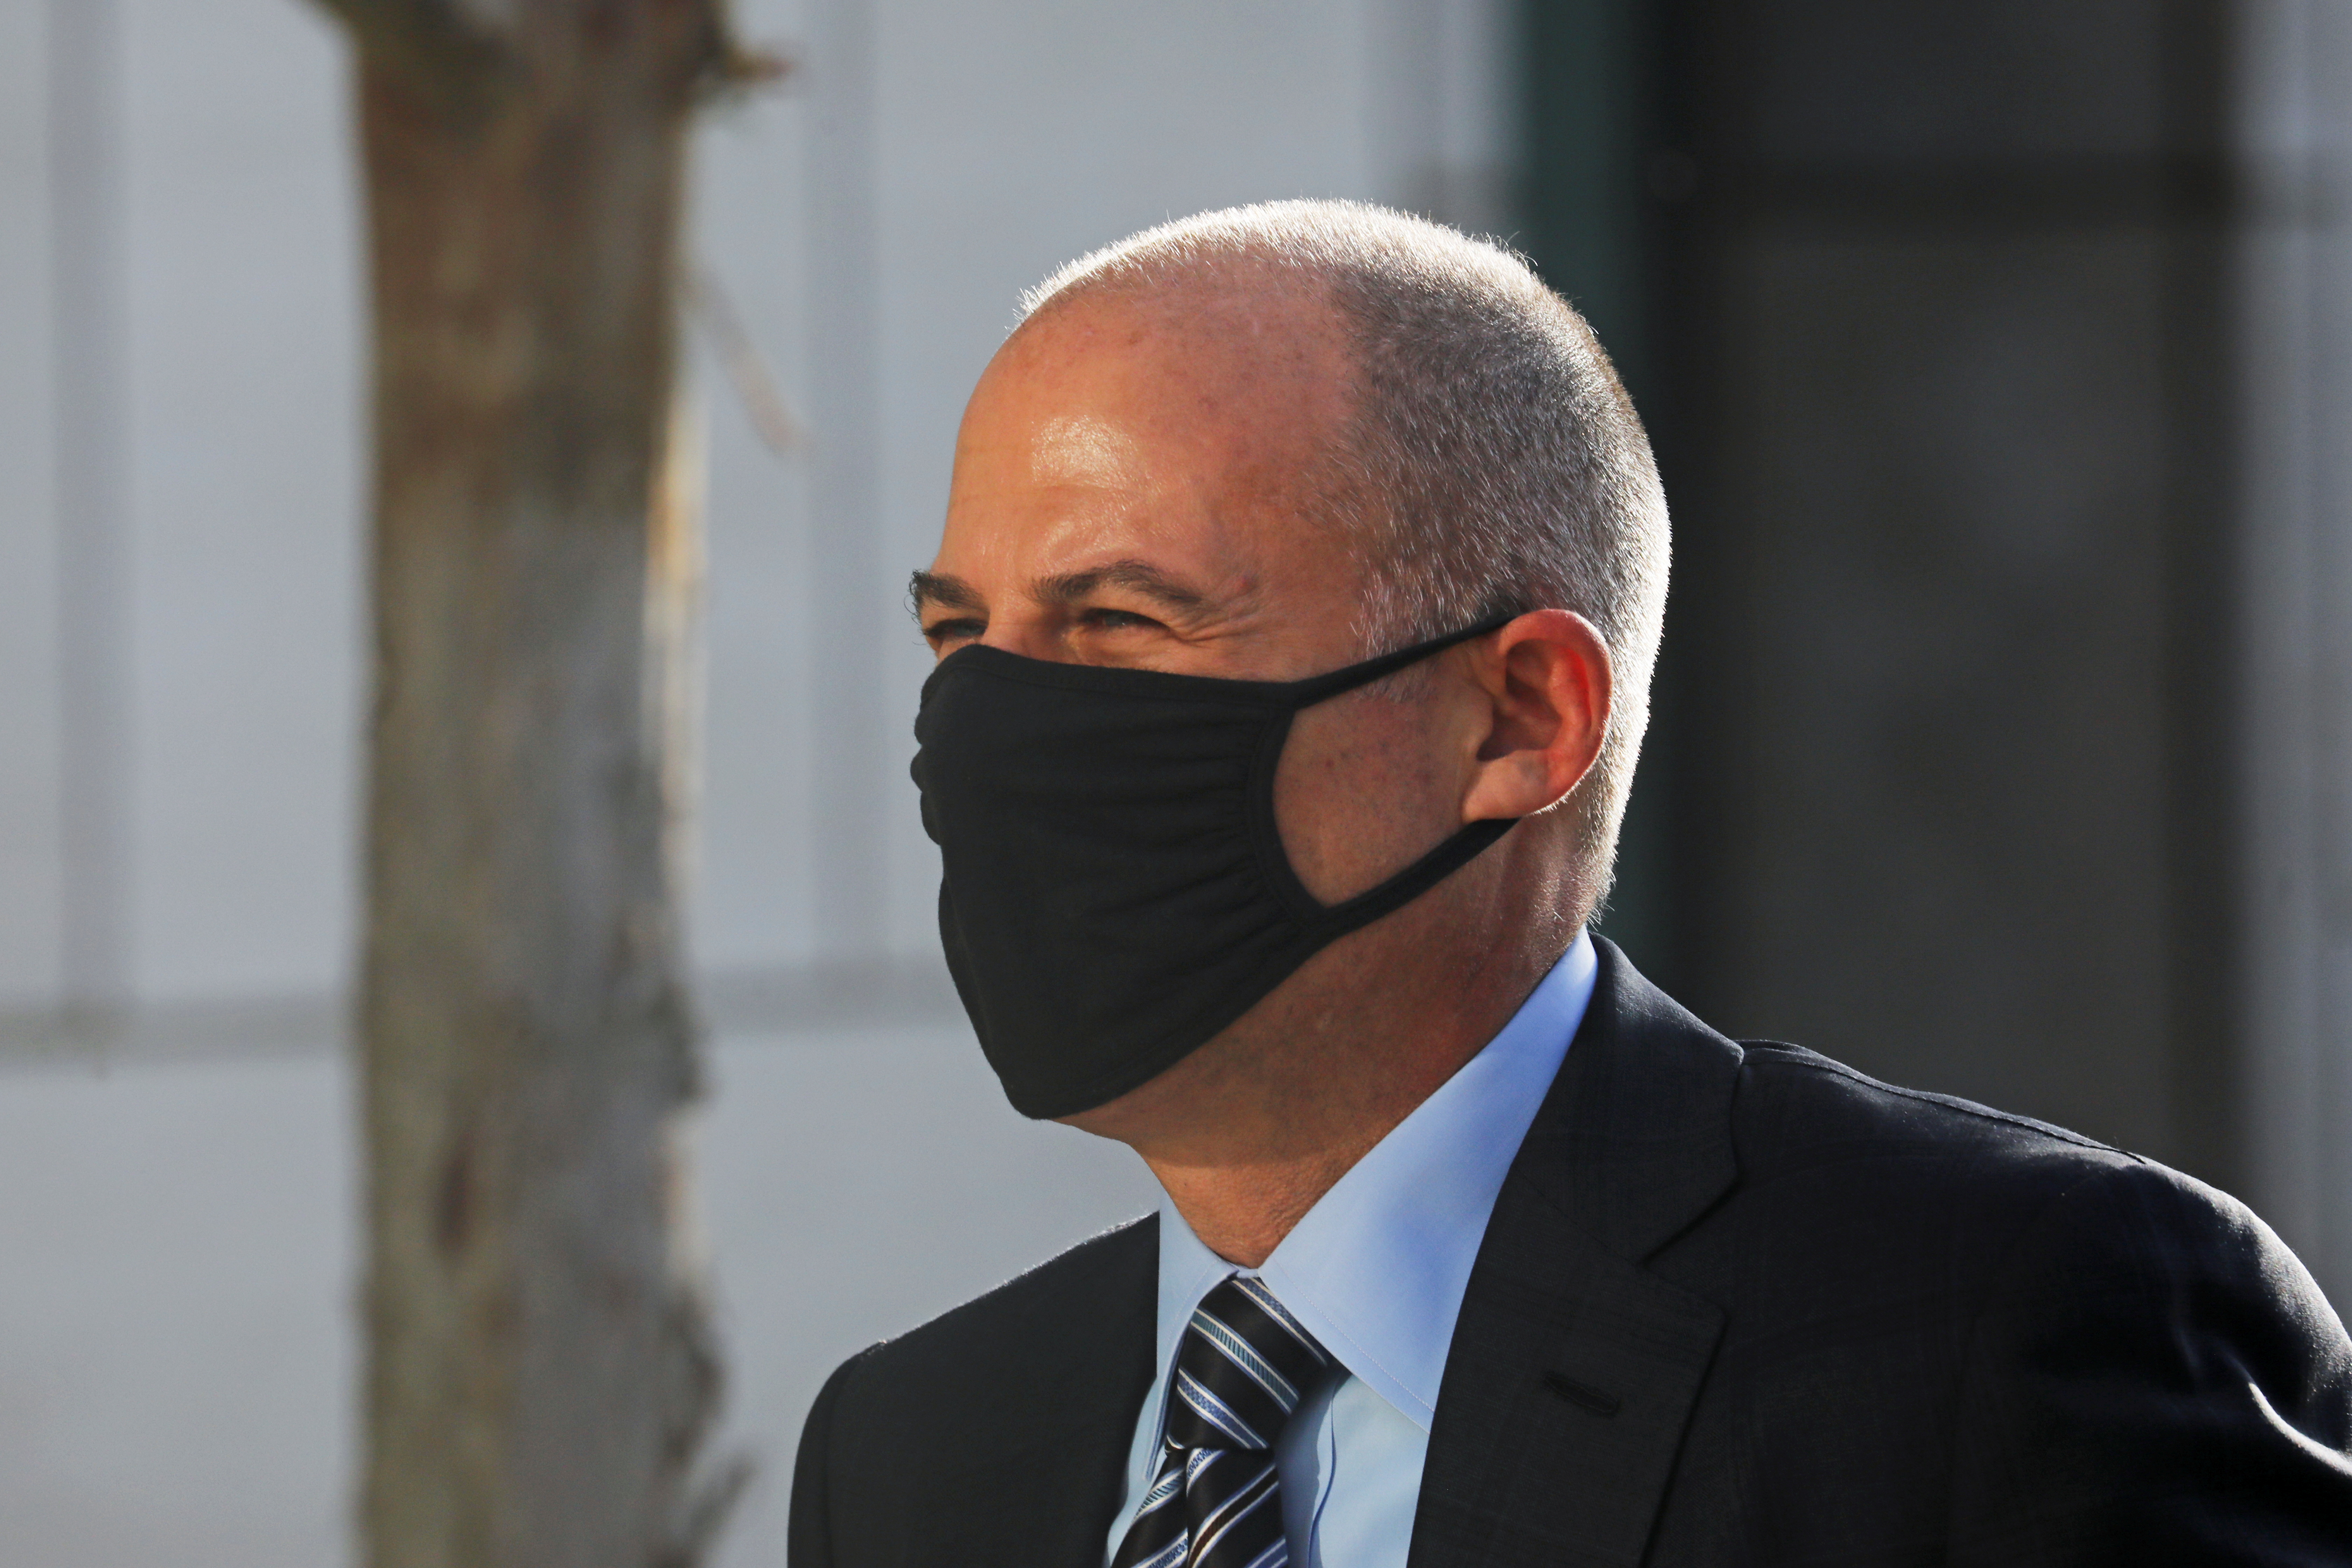 Attorney Michael Avenatti arrives for the opening of his trial on charges of cheating his clients out of settlement money, at the United States Courthouse in Santa Ana